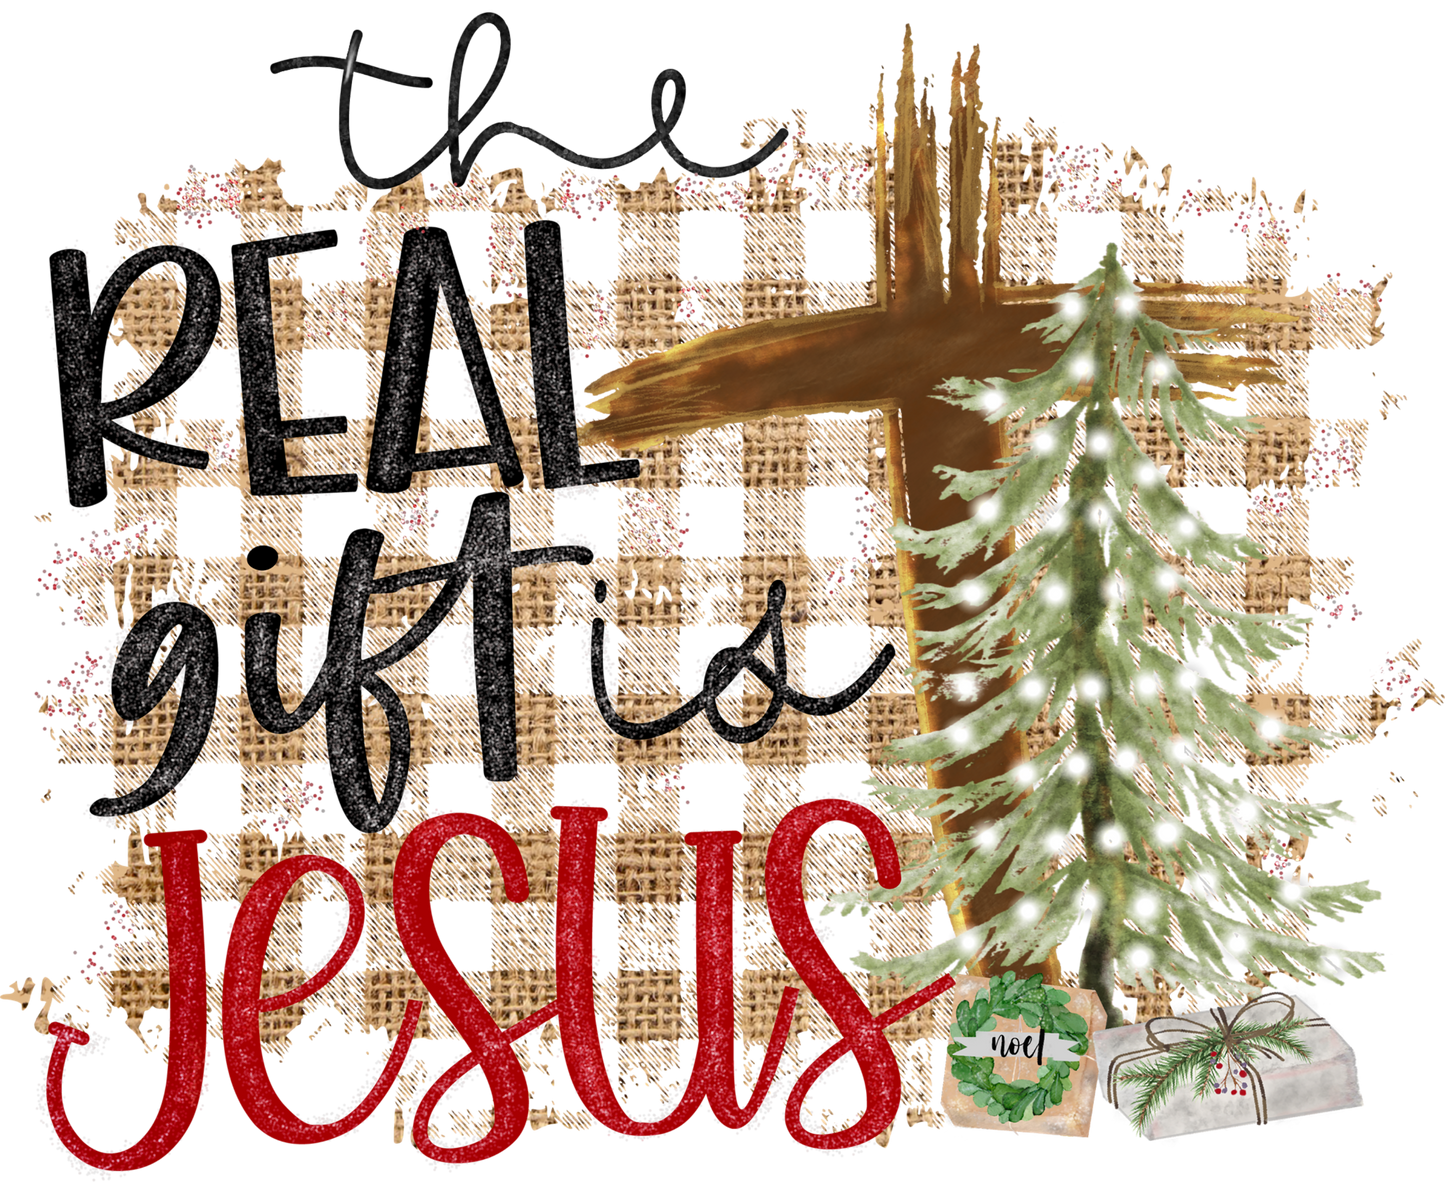 The Real Gift is Jesus